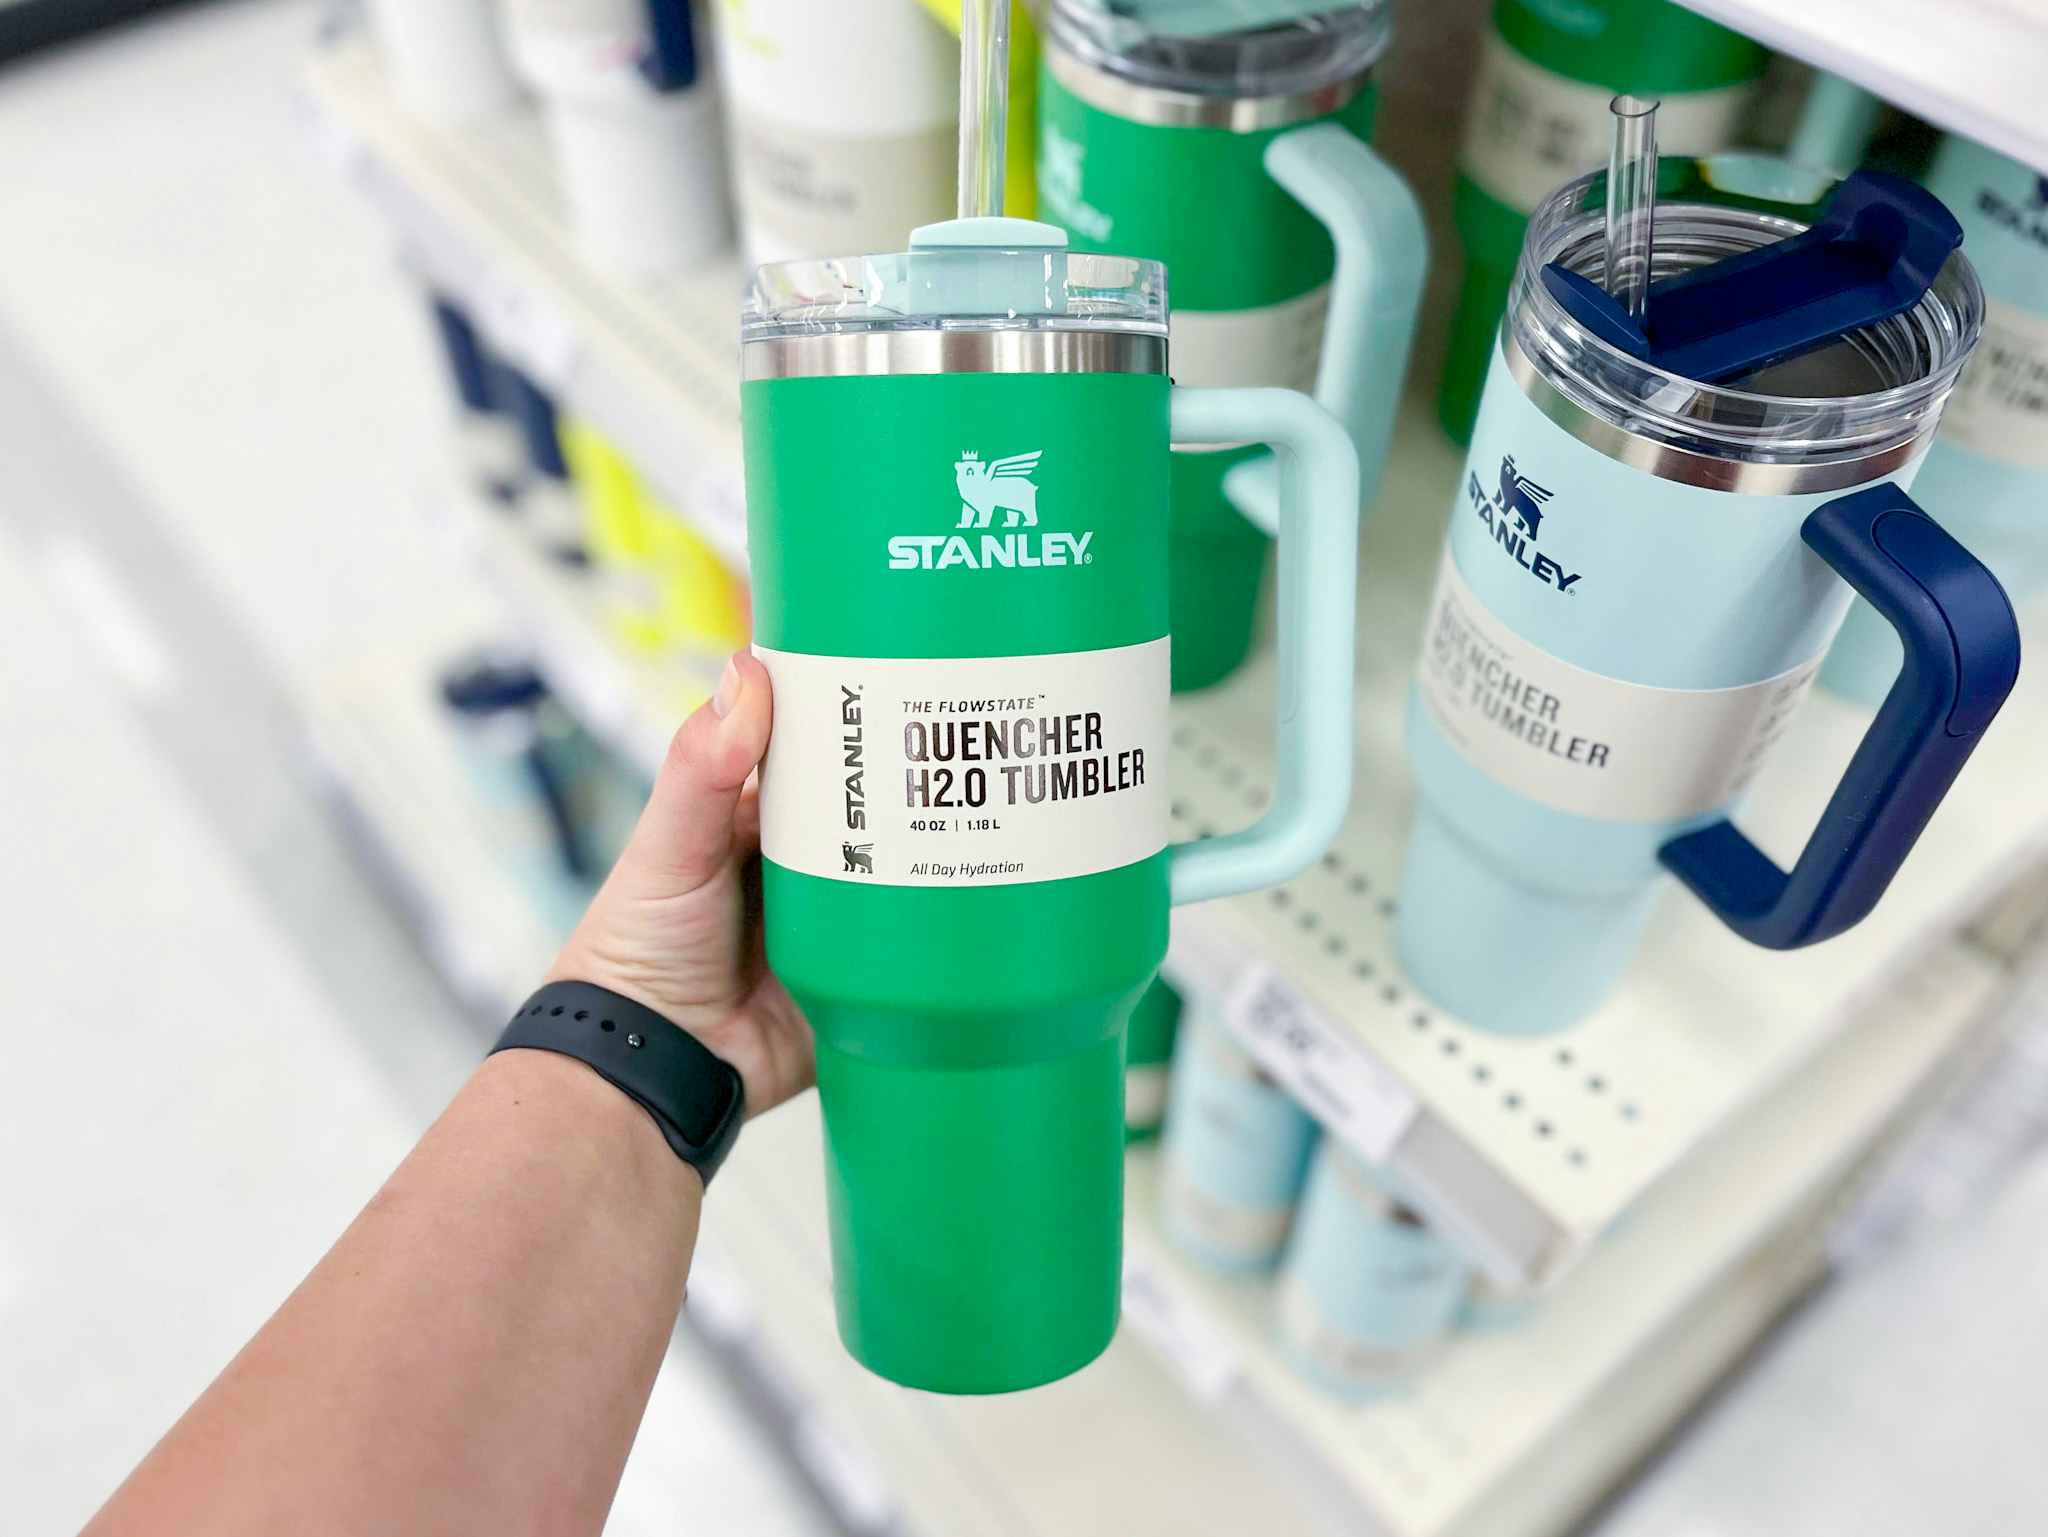 Shop the Deal of the Day on Stanley 40-oz. tumbler! - Target